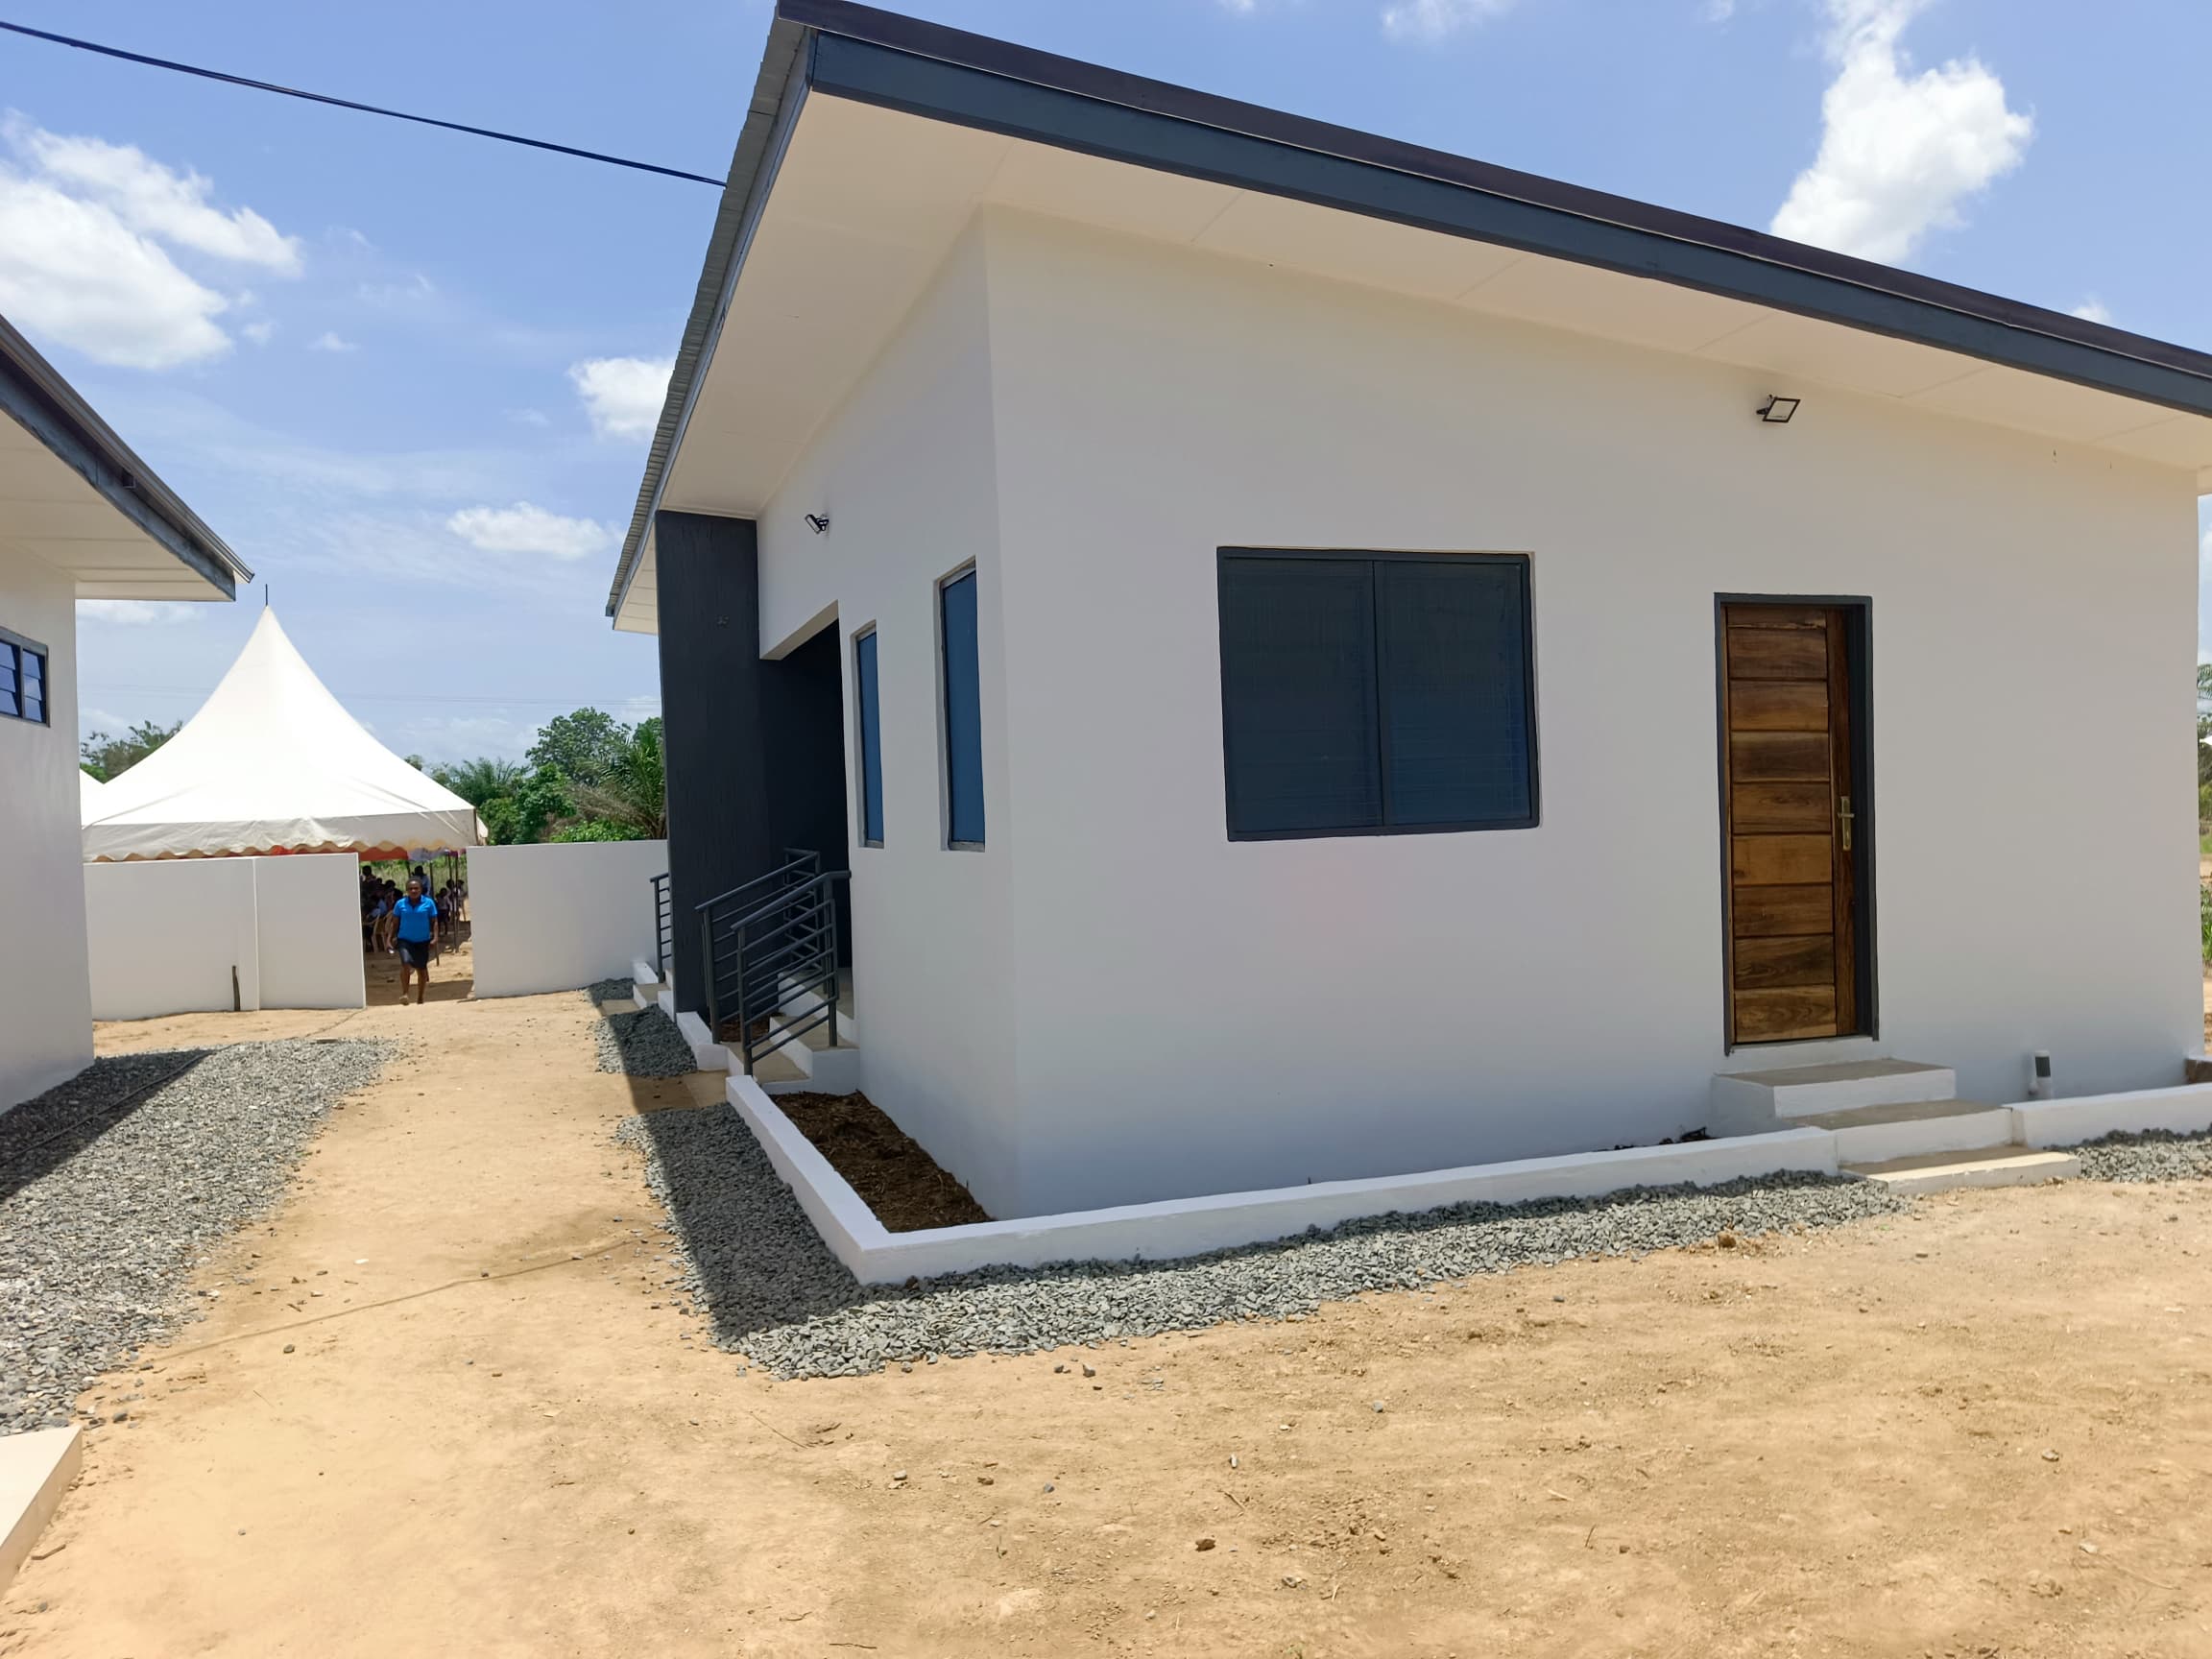 Citi TV/Citi FM and Chamber of Mines unveil ultra-modern Health Centre in Mepe